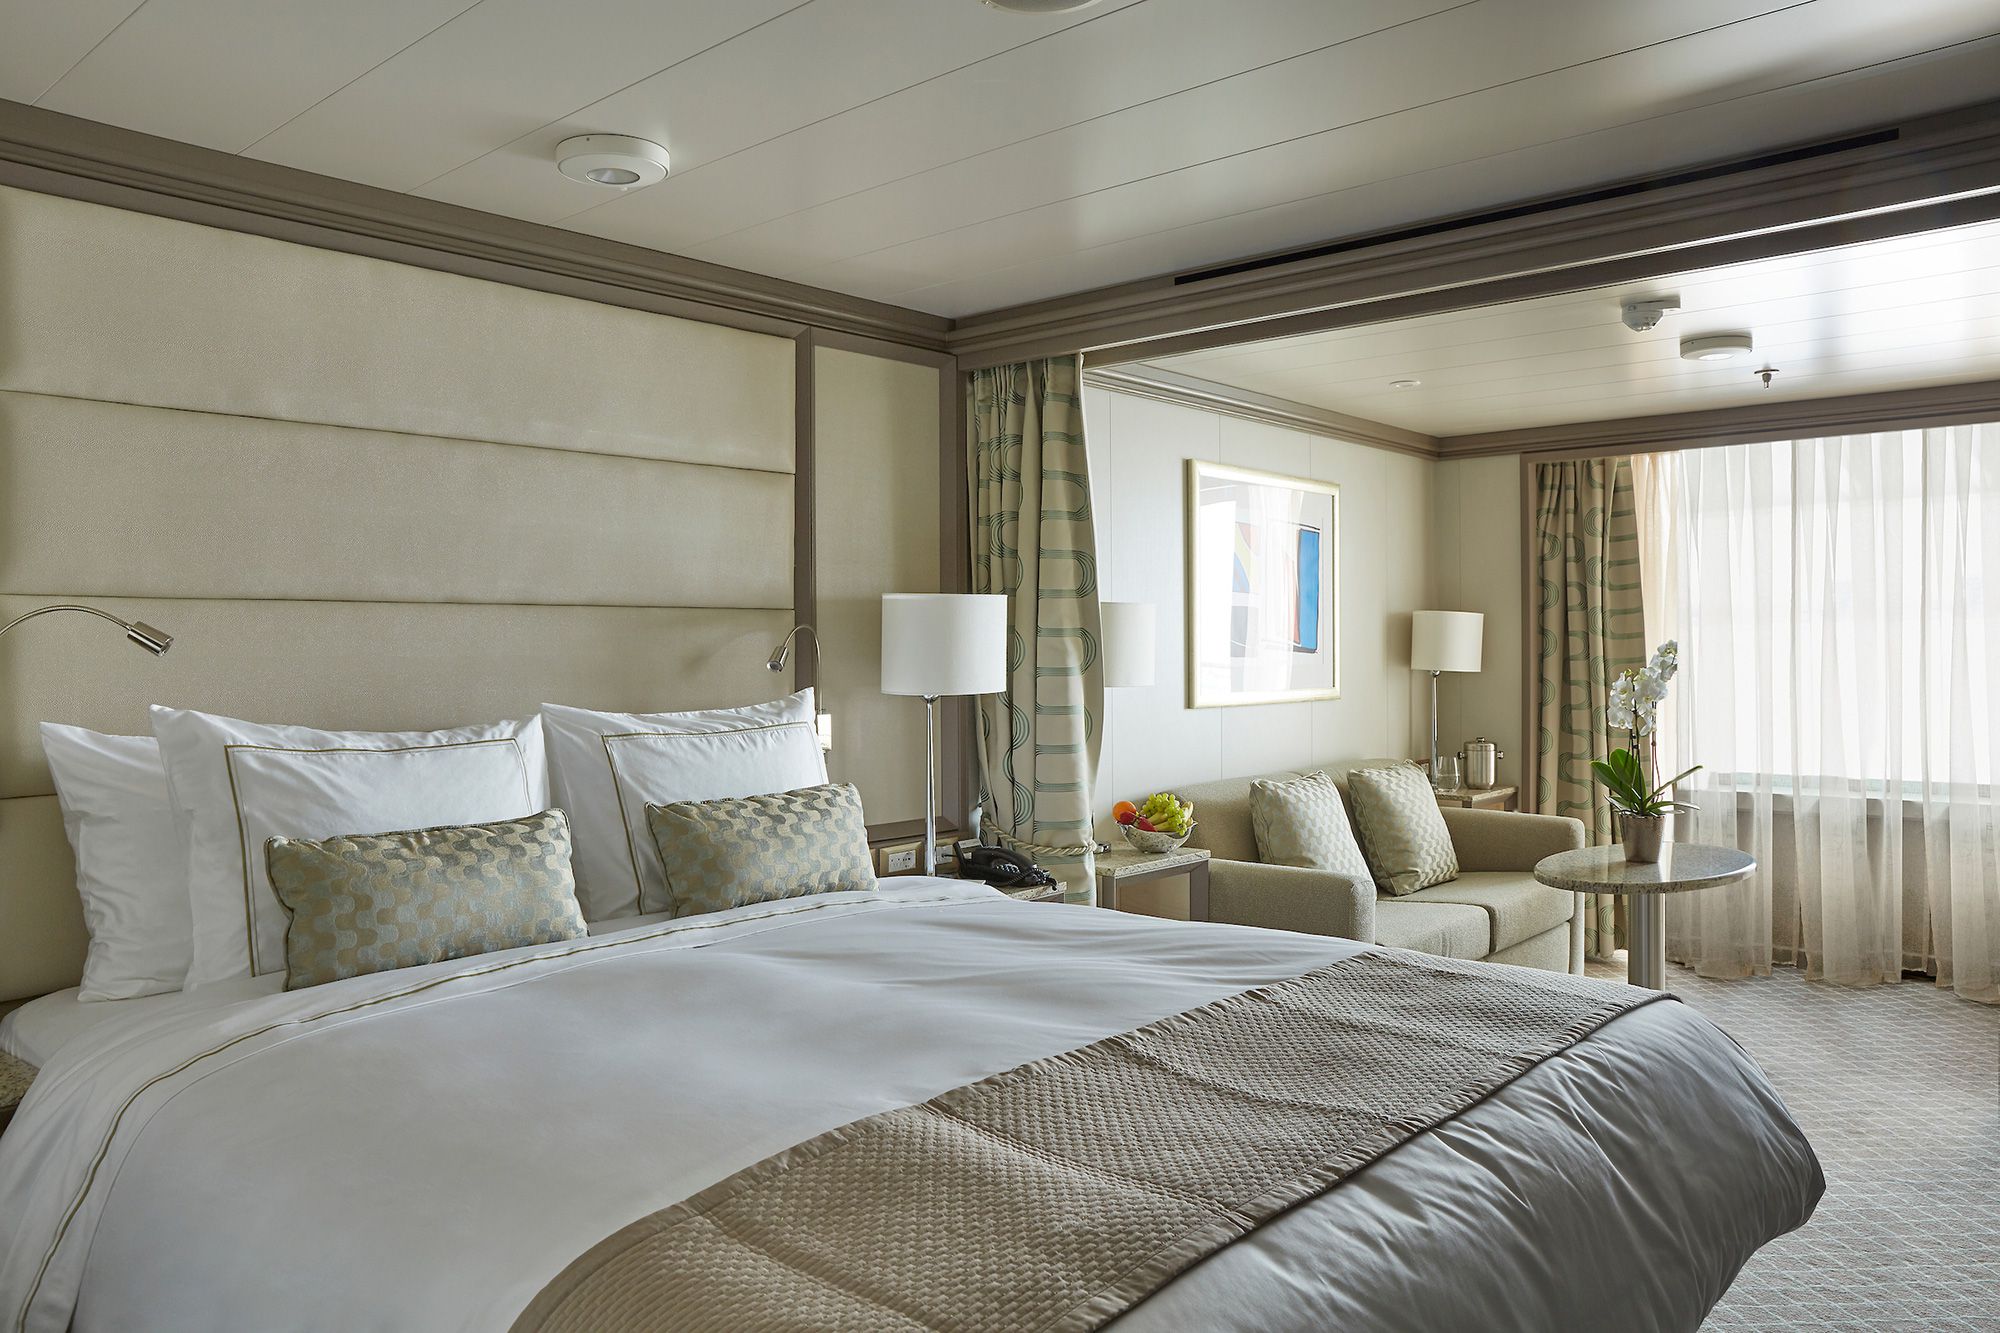 All guestrooms are designed to the specification of a suite © Silver Sea Cruise, Japan Office